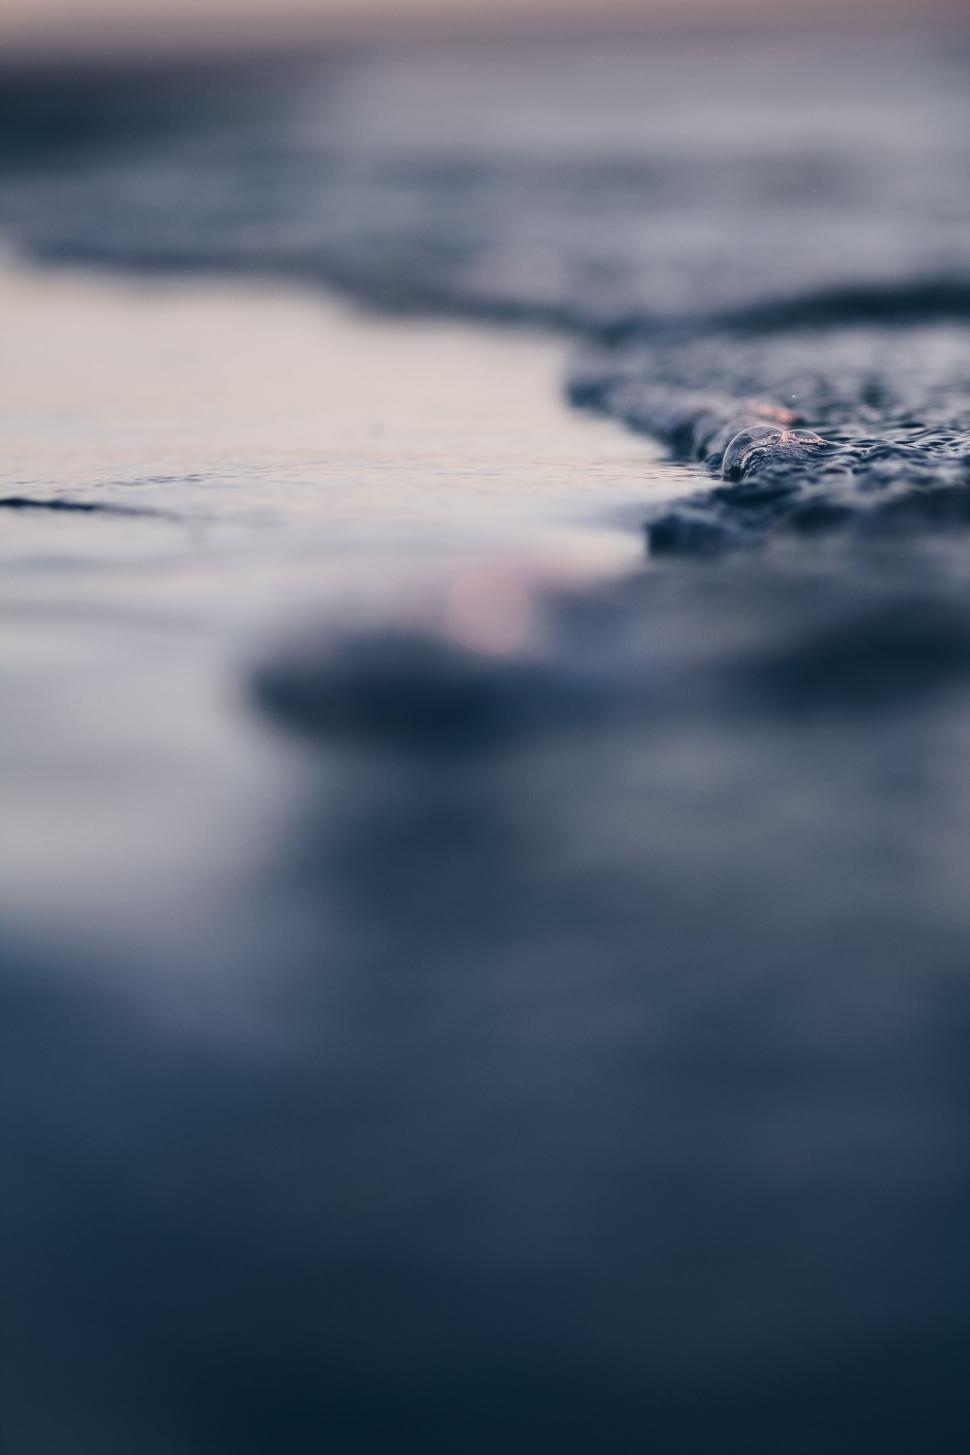 Free Image of Blurry Wave in the Ocean 